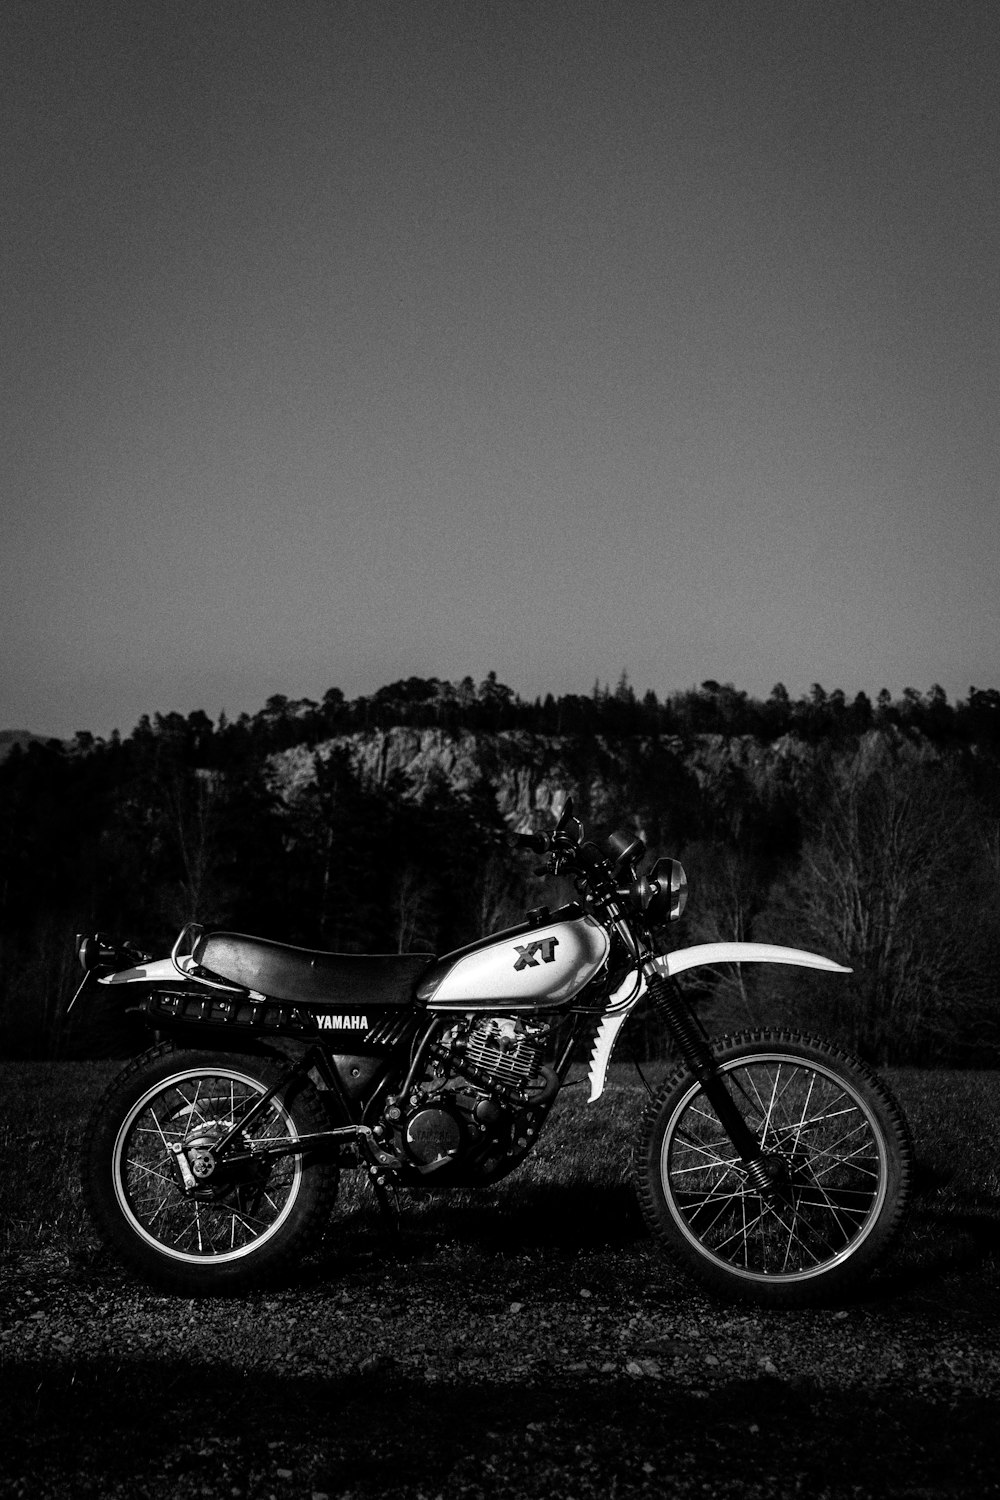 grayscale photo of motorcycle near trees